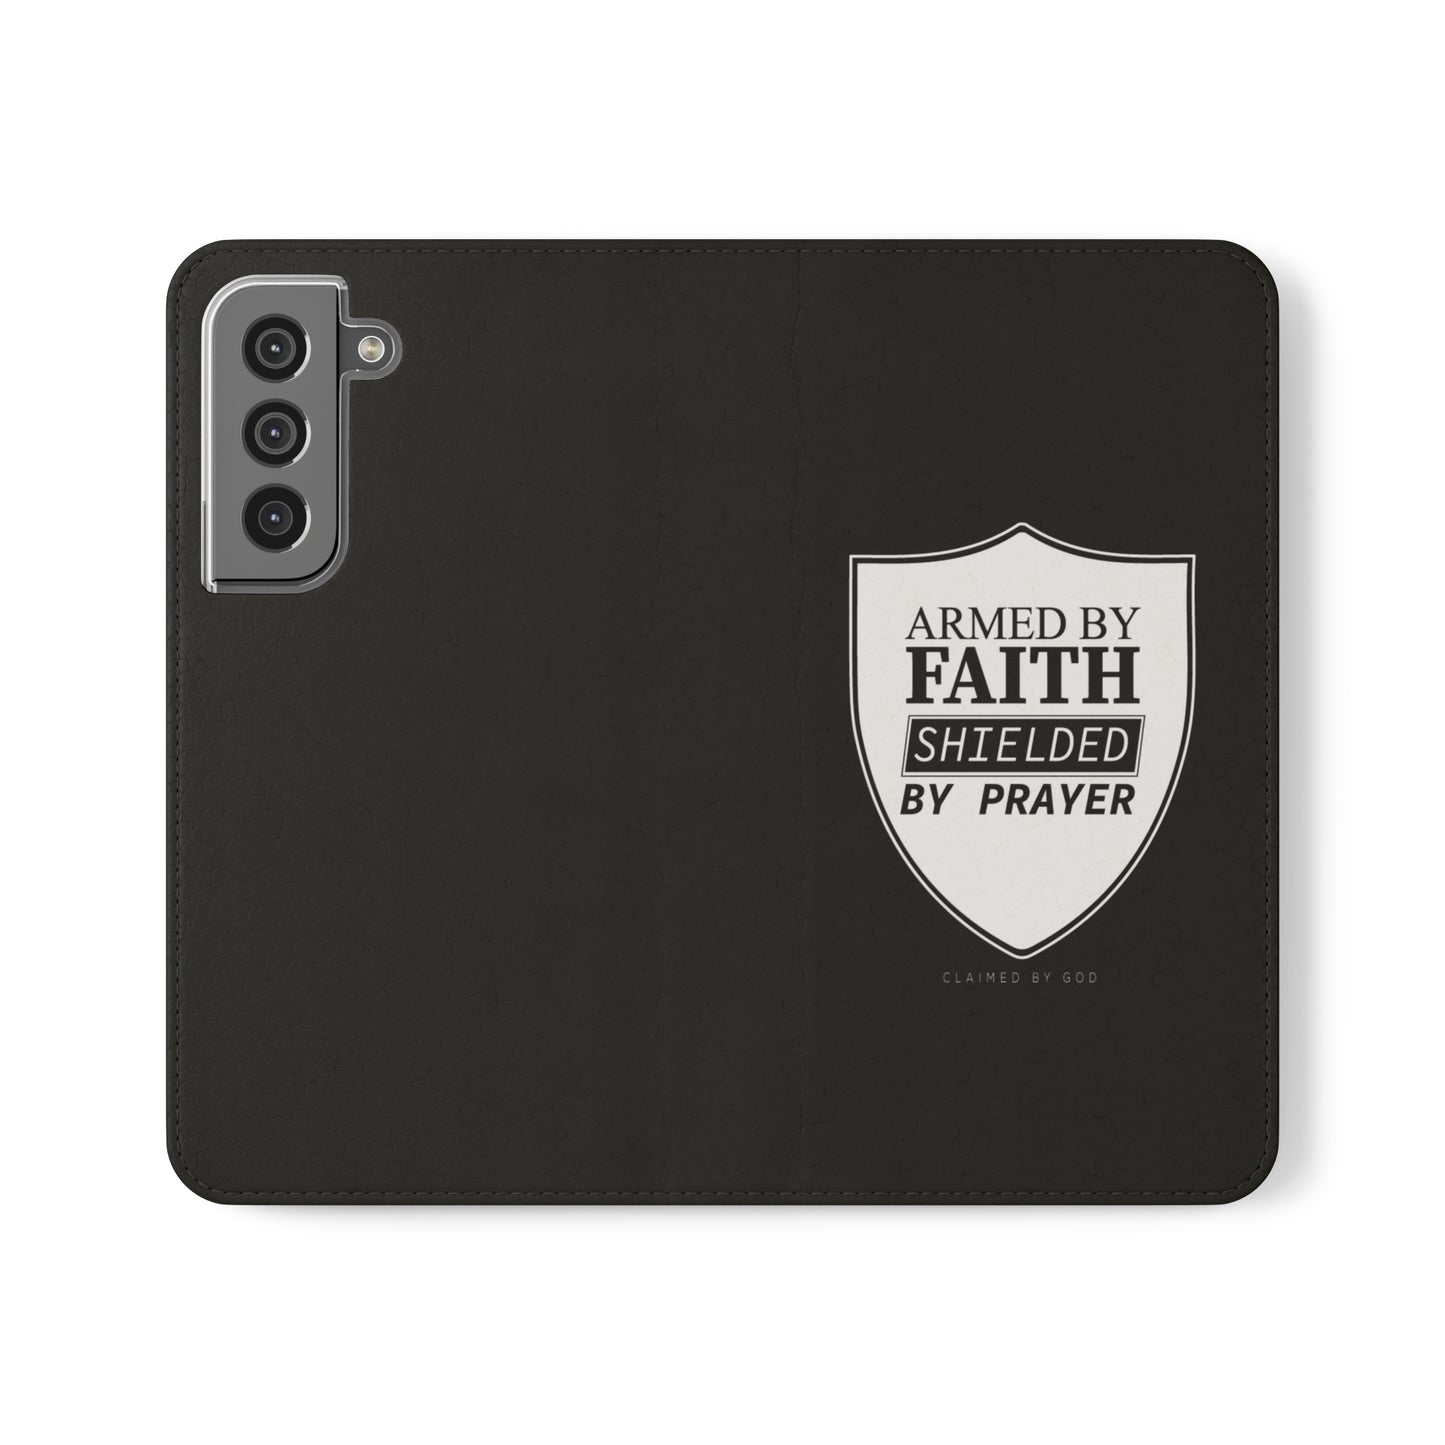 Armed By Faith Shielded By Prayer Phone Flip Cases